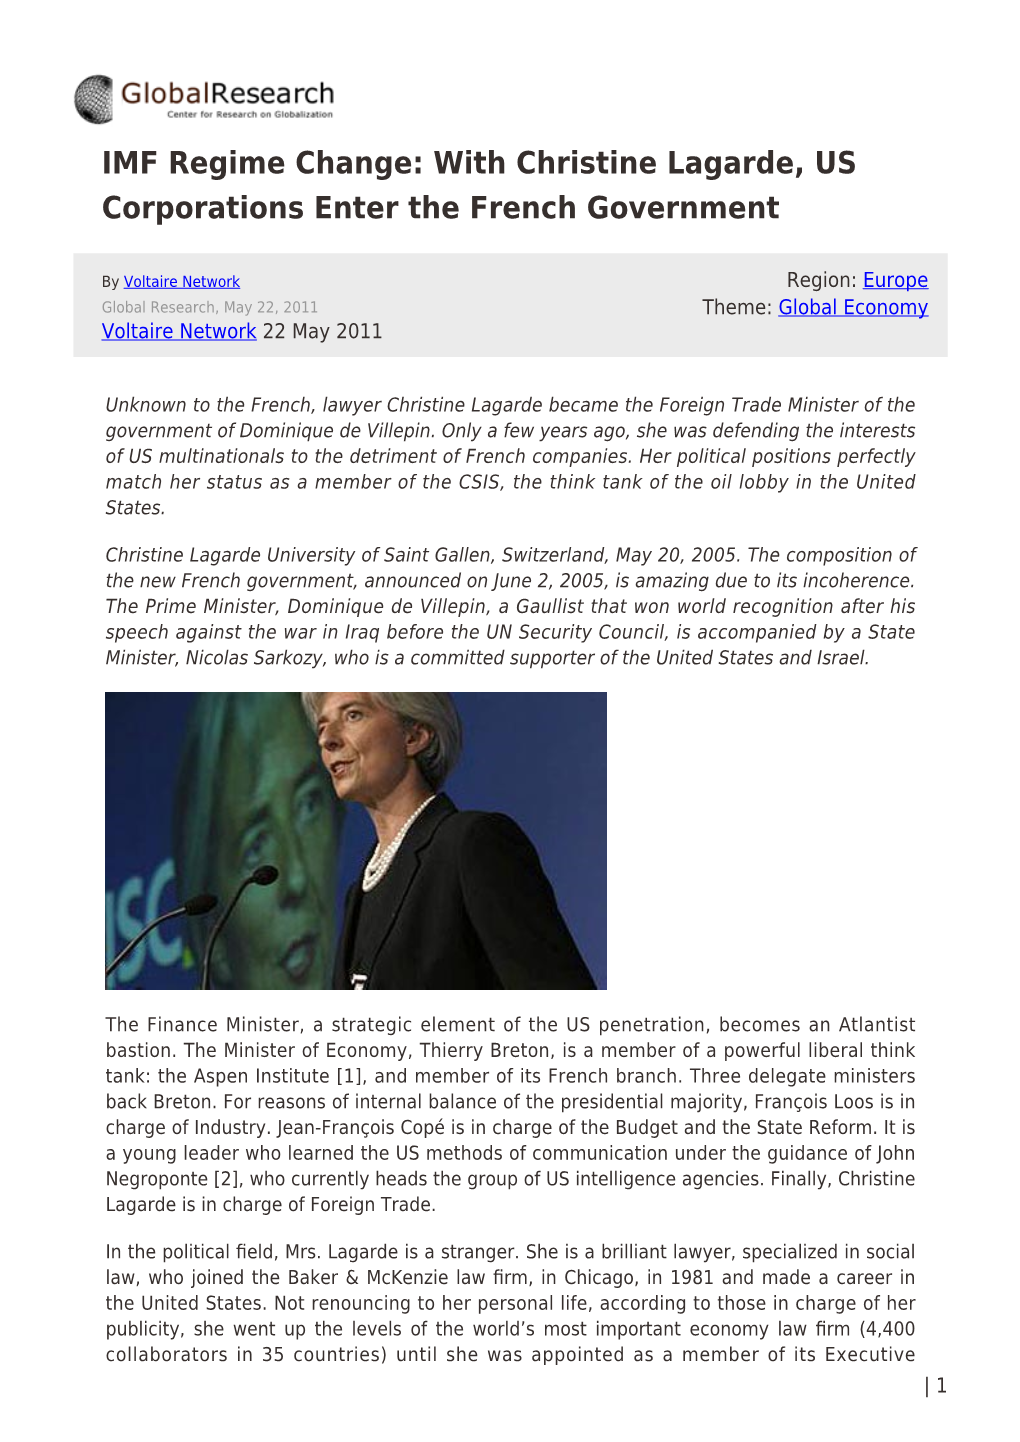 IMF Regime Change: with Christine Lagarde, US Corporations Enter the French Government